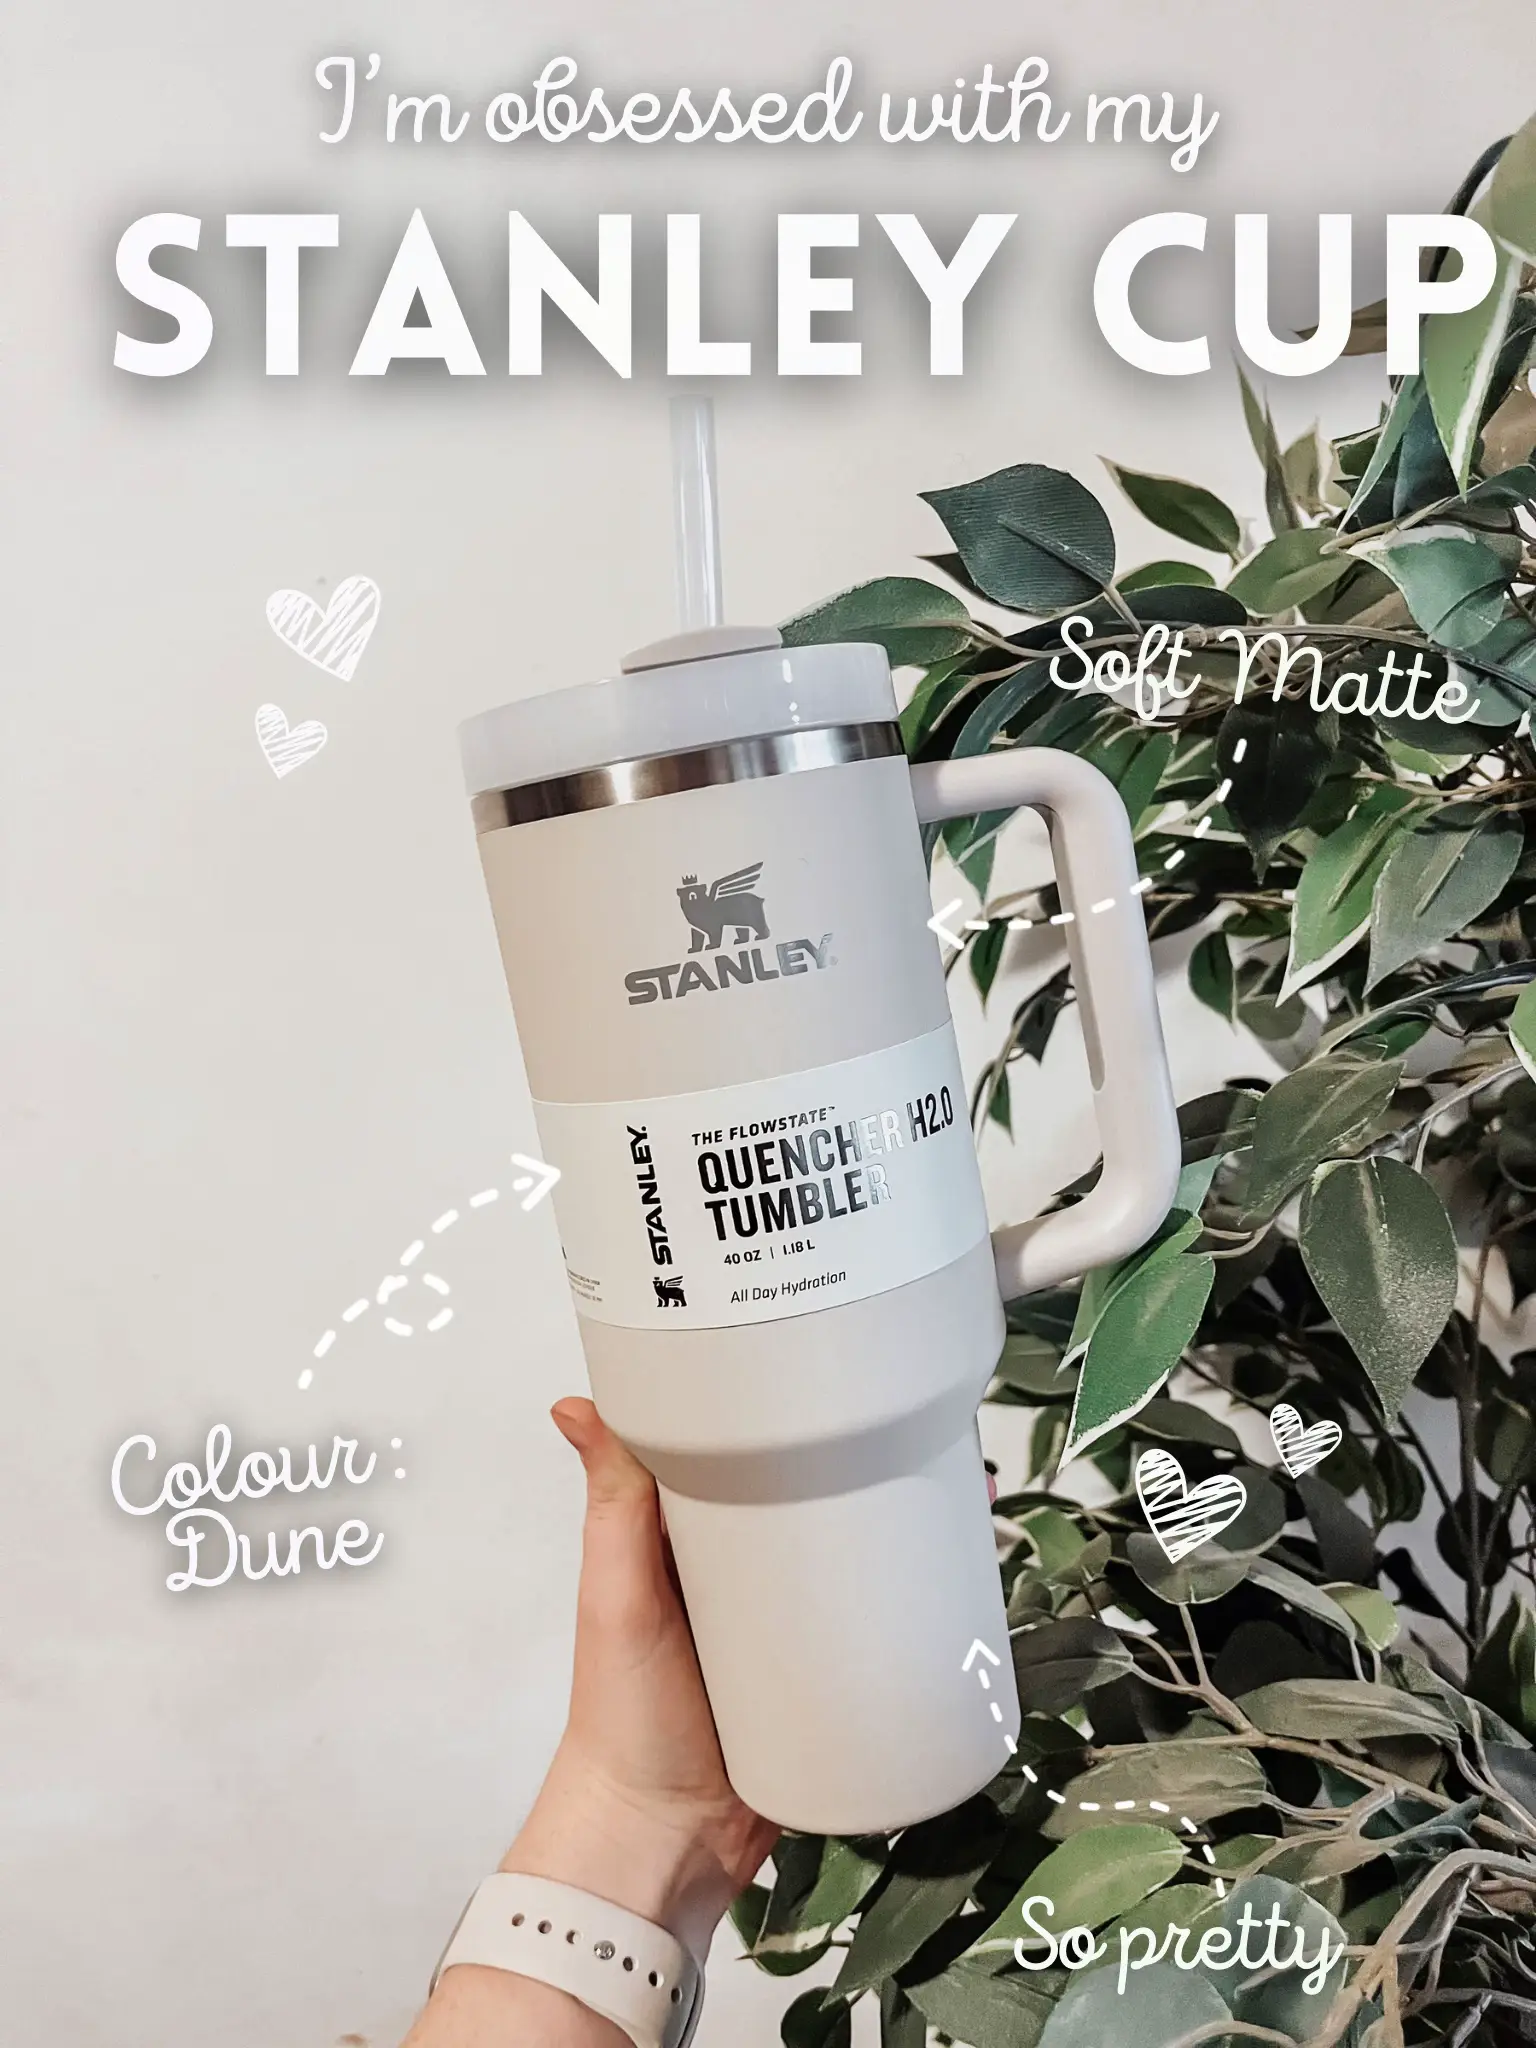 My new Stanley cup 🤍, Gallery posted by Elizabeth Long